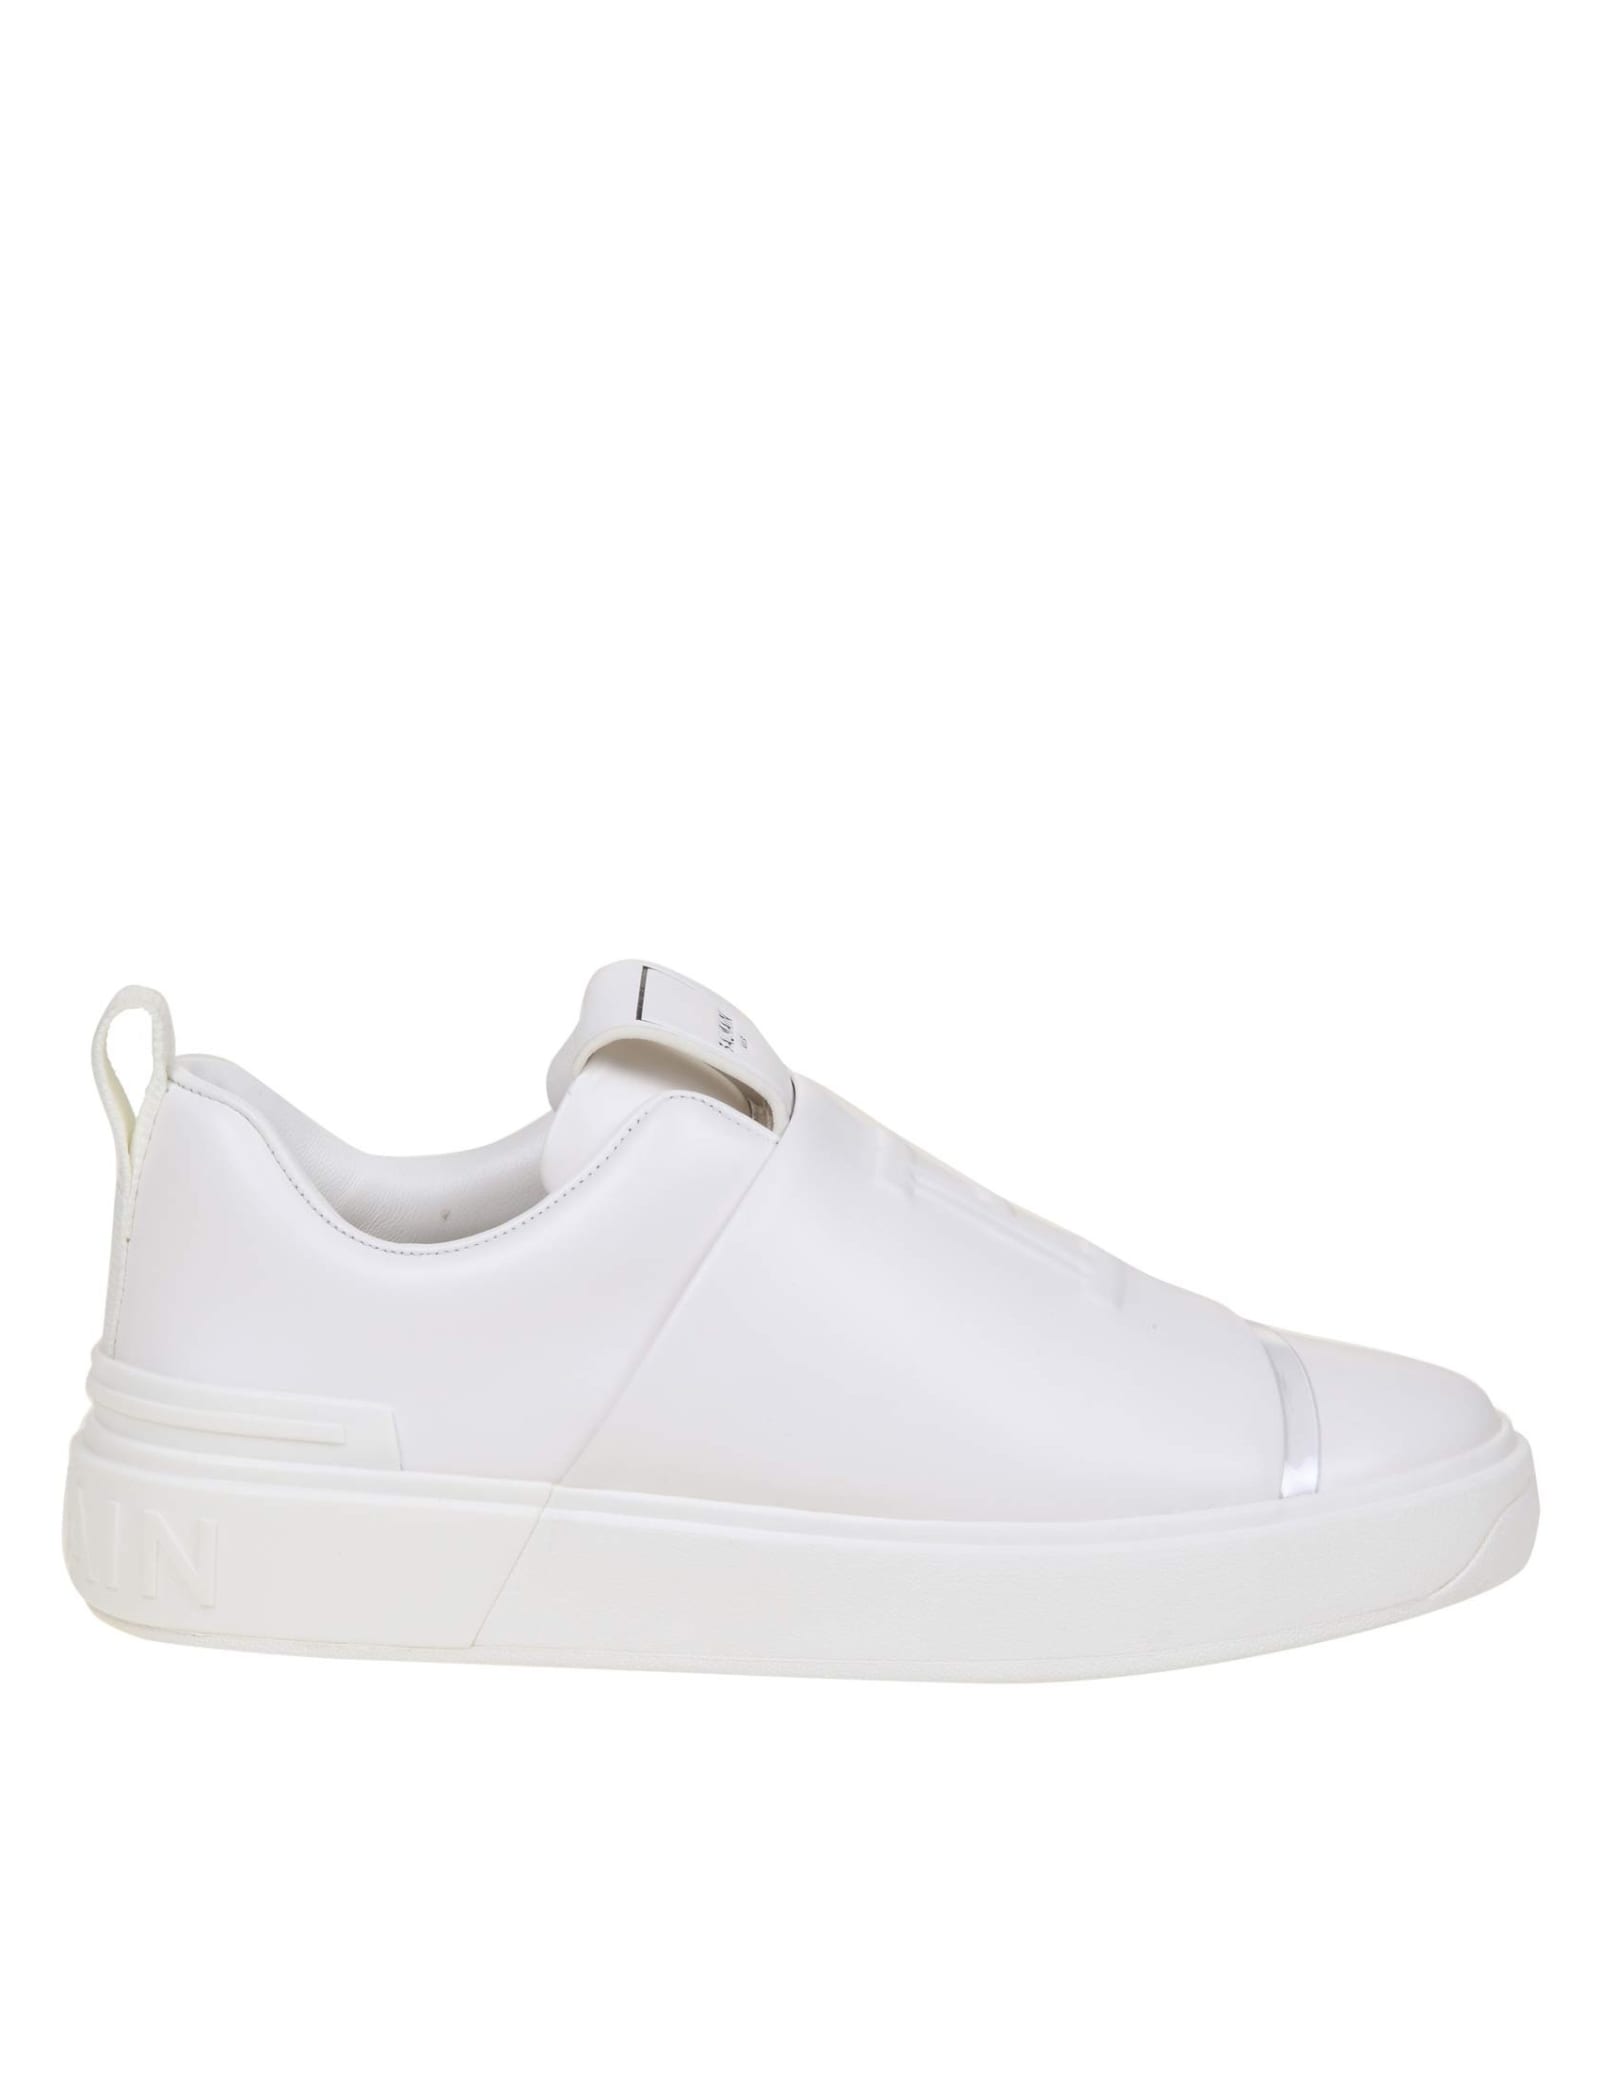 Buy Balmain B-court Easy Sneakers In Leather With Logo online, shop Balmain shoes with free shipping